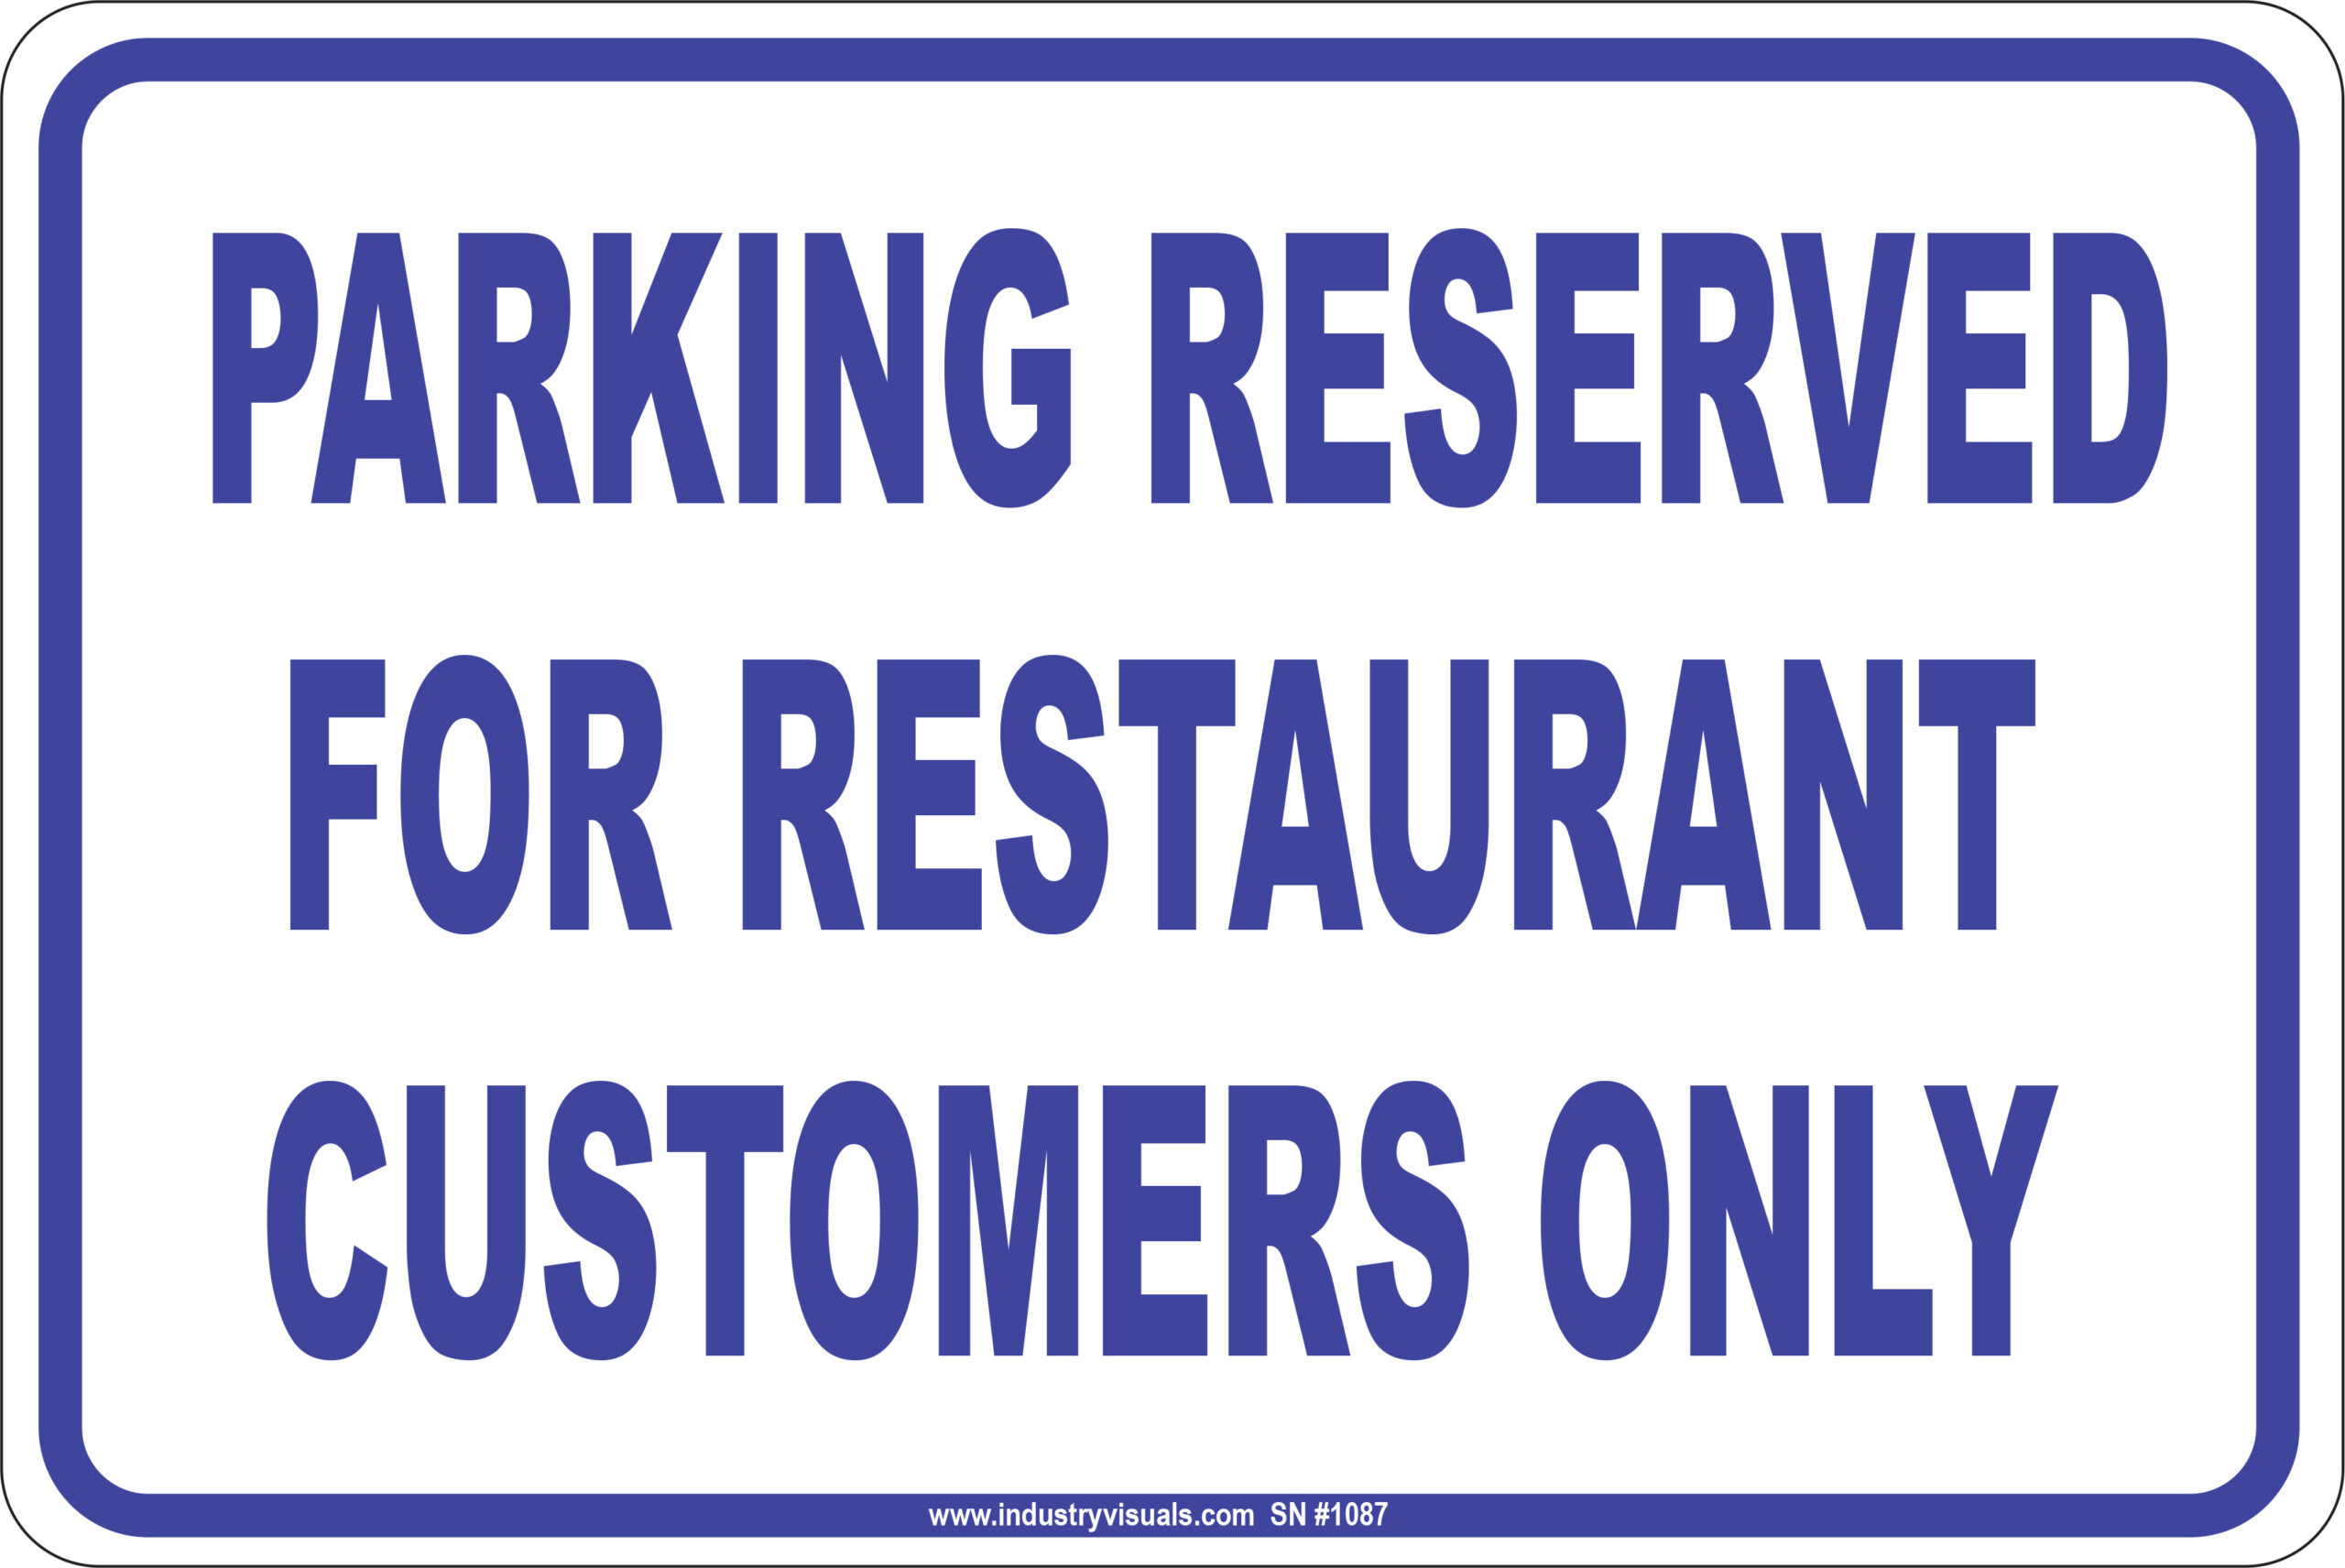 Parking Reserved for Restaurant Customers Only Industry Visuals